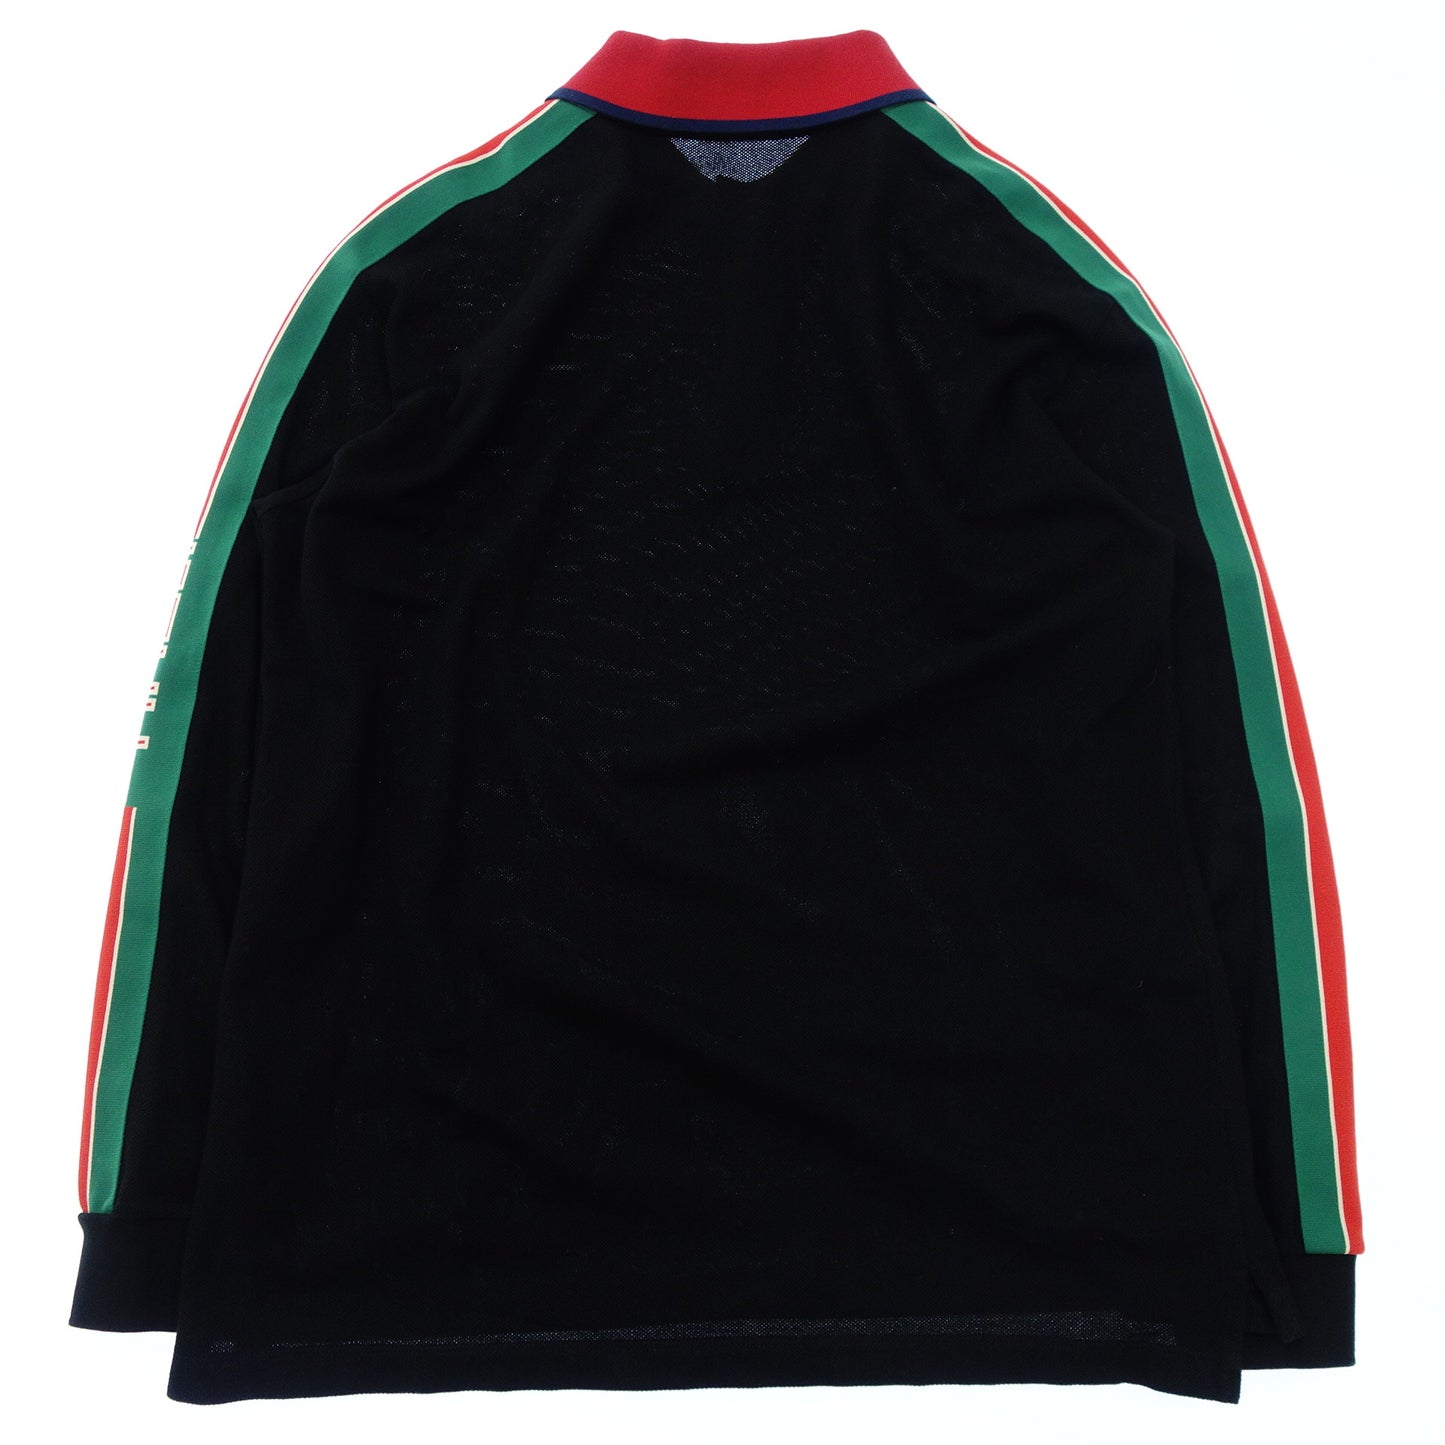 Gucci long sleeve polo shirt tricolor logo 545784 Men's black XL GUCCI [AFB13] [Used] 